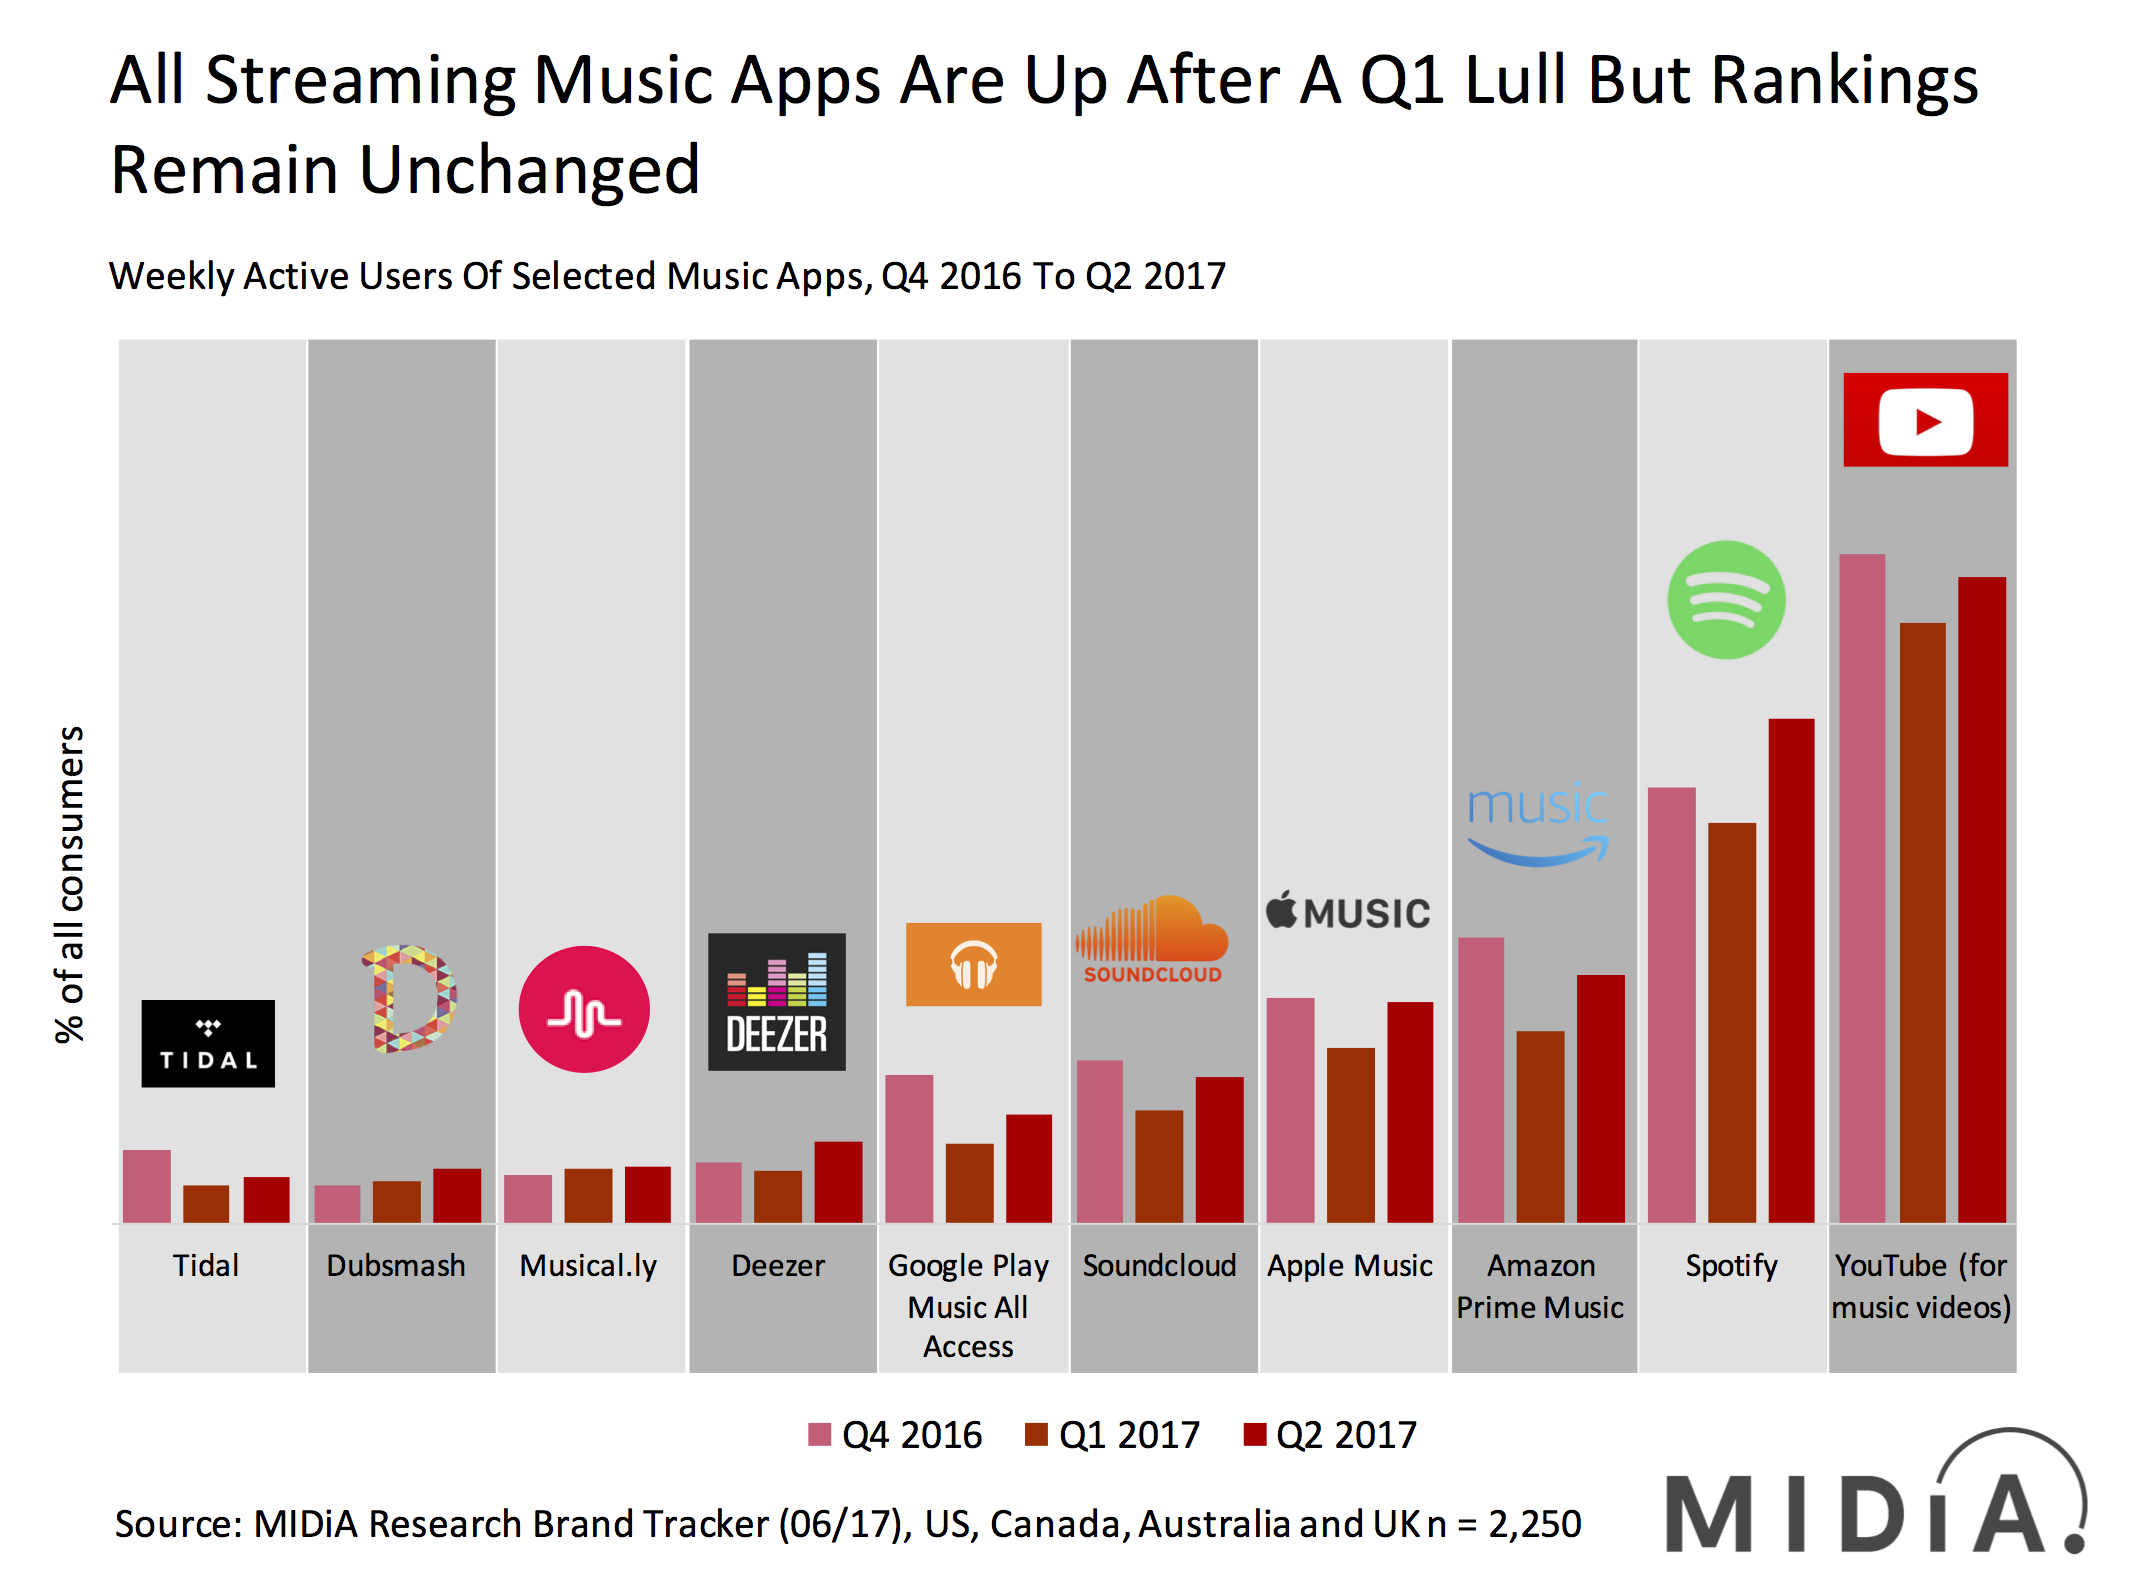 Cover image for Spotify, Netflix And Instagram Make Gains In Q2 2017